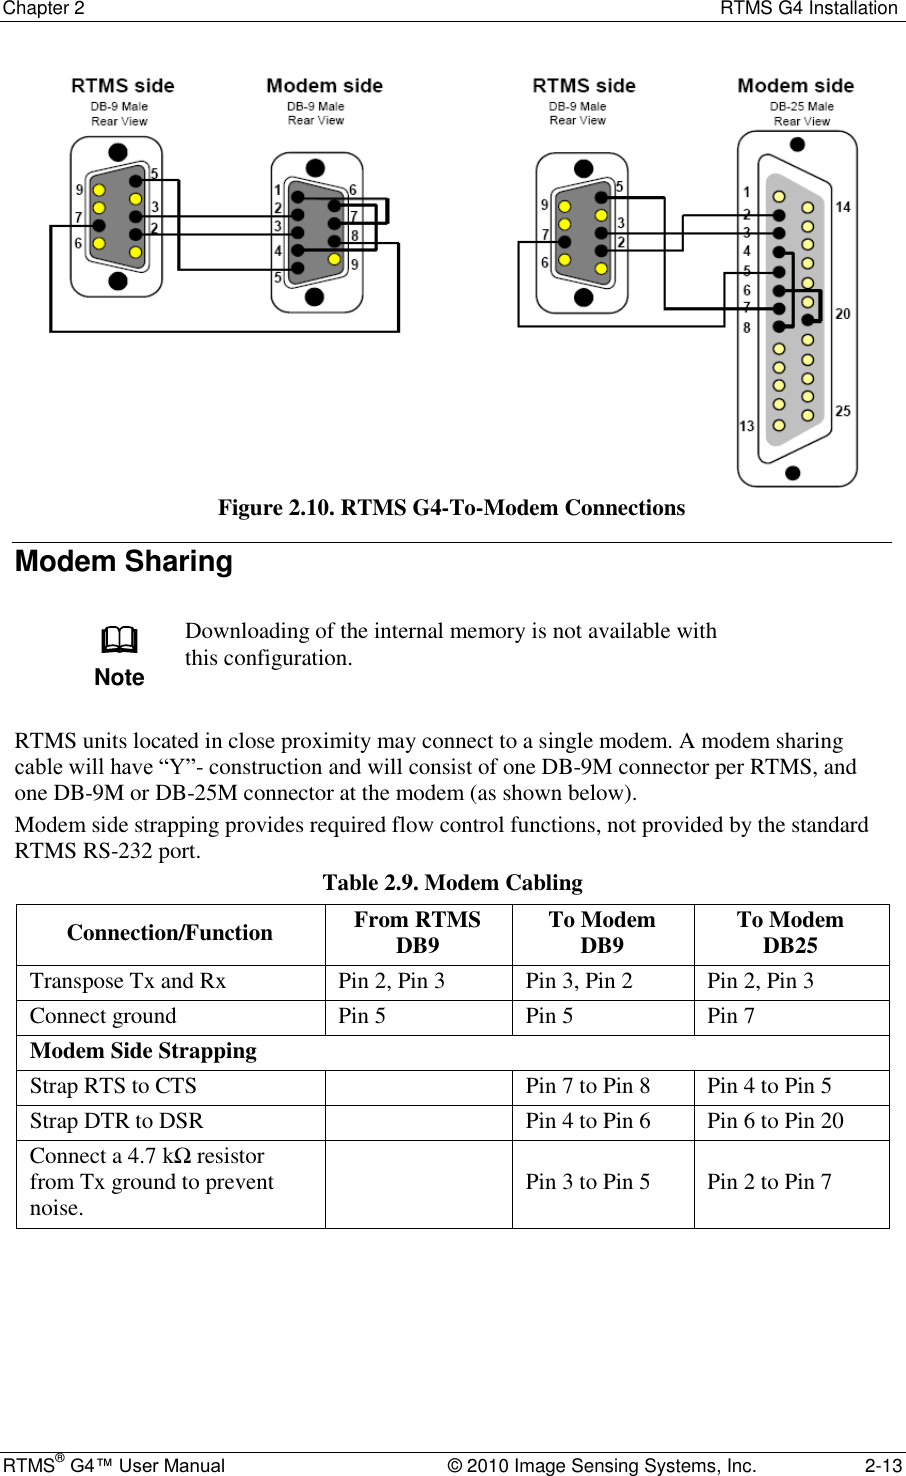 Chapter 2  RTMS G4 Installation RTMS® G4™ User Manual  © 2010 Image Sensing Systems, Inc.  2-13  Figure 2.10. RTMS G4-To-Modem Connections Modem Sharing   Note Downloading of the internal memory is not available with this configuration.  RTMS units located in close proximity may connect to a single modem. A modem sharing cable will have ―Y‖- construction and will consist of one DB-9M connector per RTMS, and one DB-9M or DB-25M connector at the modem (as shown below). Modem side strapping provides required flow control functions, not provided by the standard RTMS RS-232 port. Table 2.9. Modem Cabling Connection/Function From RTMS DB9 To Modem DB9 To Modem DB25 Transpose Tx and Rx Pin 2, Pin 3 Pin 3, Pin 2 Pin 2, Pin 3 Connect ground Pin 5 Pin 5 Pin 7 Modem Side Strapping Strap RTS to CTS  Pin 7 to Pin 8 Pin 4 to Pin 5 Strap DTR to DSR  Pin 4 to Pin 6 Pin 6 to Pin 20 Connect a 4.7 kΩ resistor from Tx ground to prevent noise.  Pin 3 to Pin 5 Pin 2 to Pin 7  